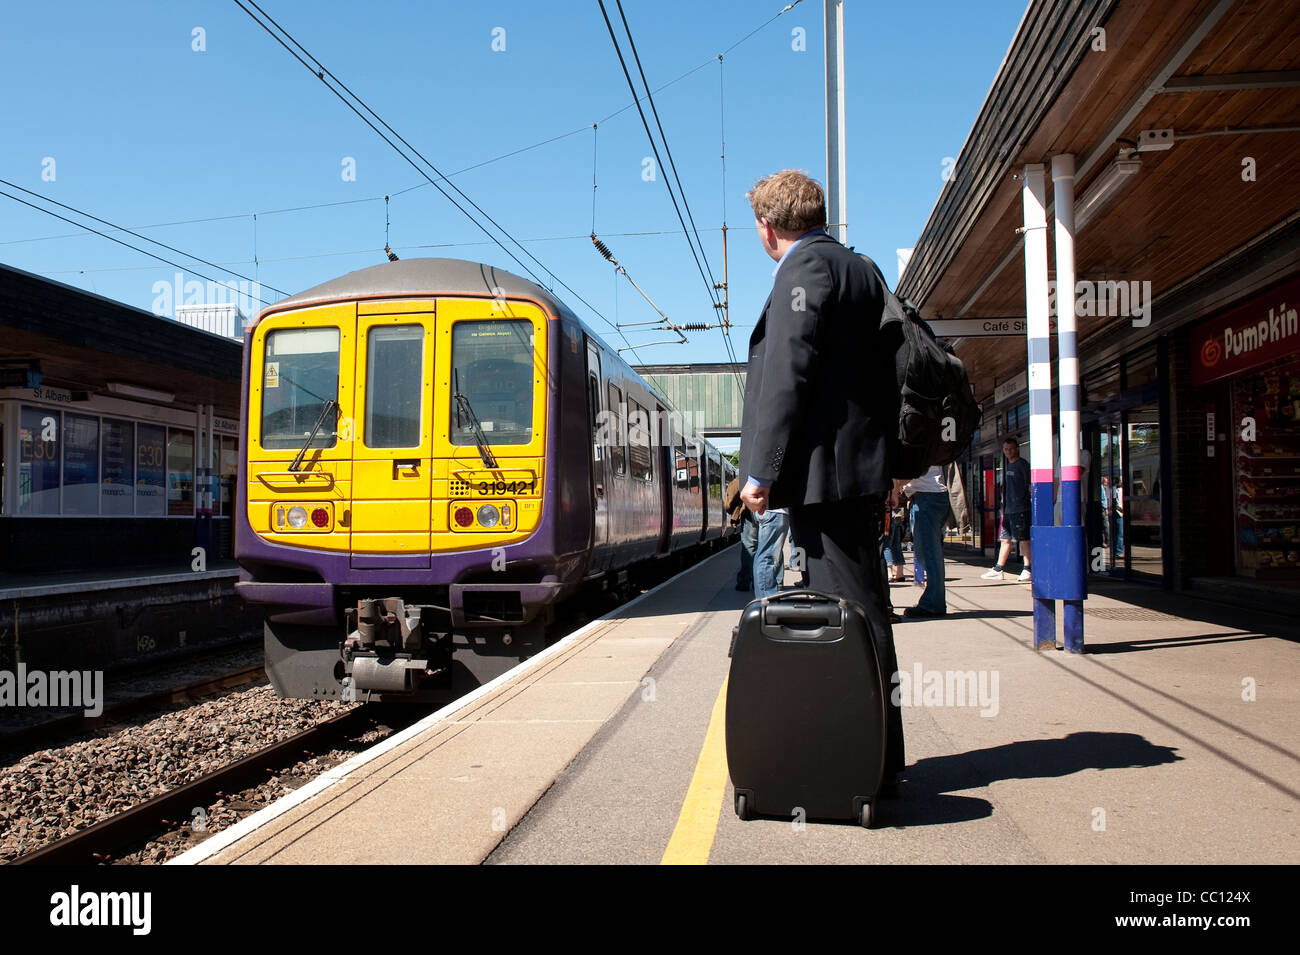 Passenger train in First Capital Connect livery pulling into a railway station in England. Stock Photo